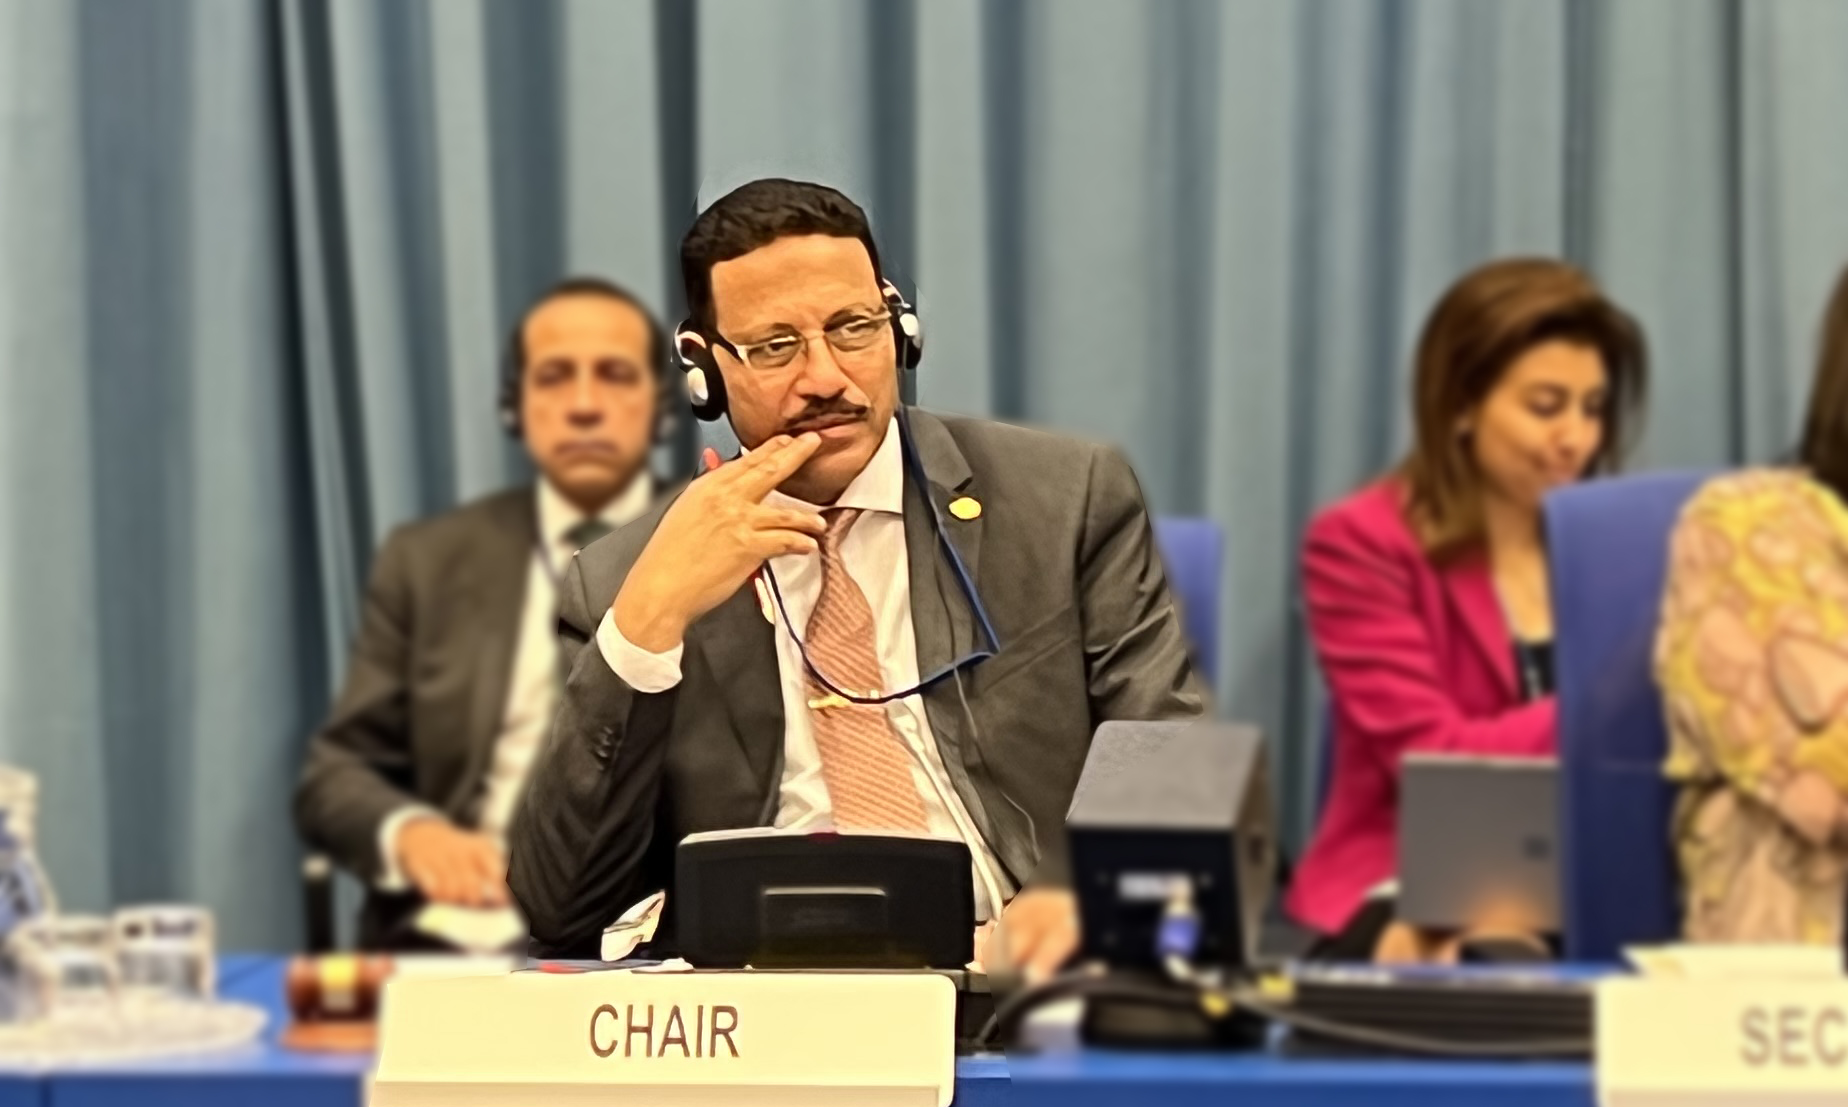 UNCAC’s Working Groups meetings in Vienna continue for the 4th day under the chairmanship of Minister Hassan AbdelShafi Ahmed